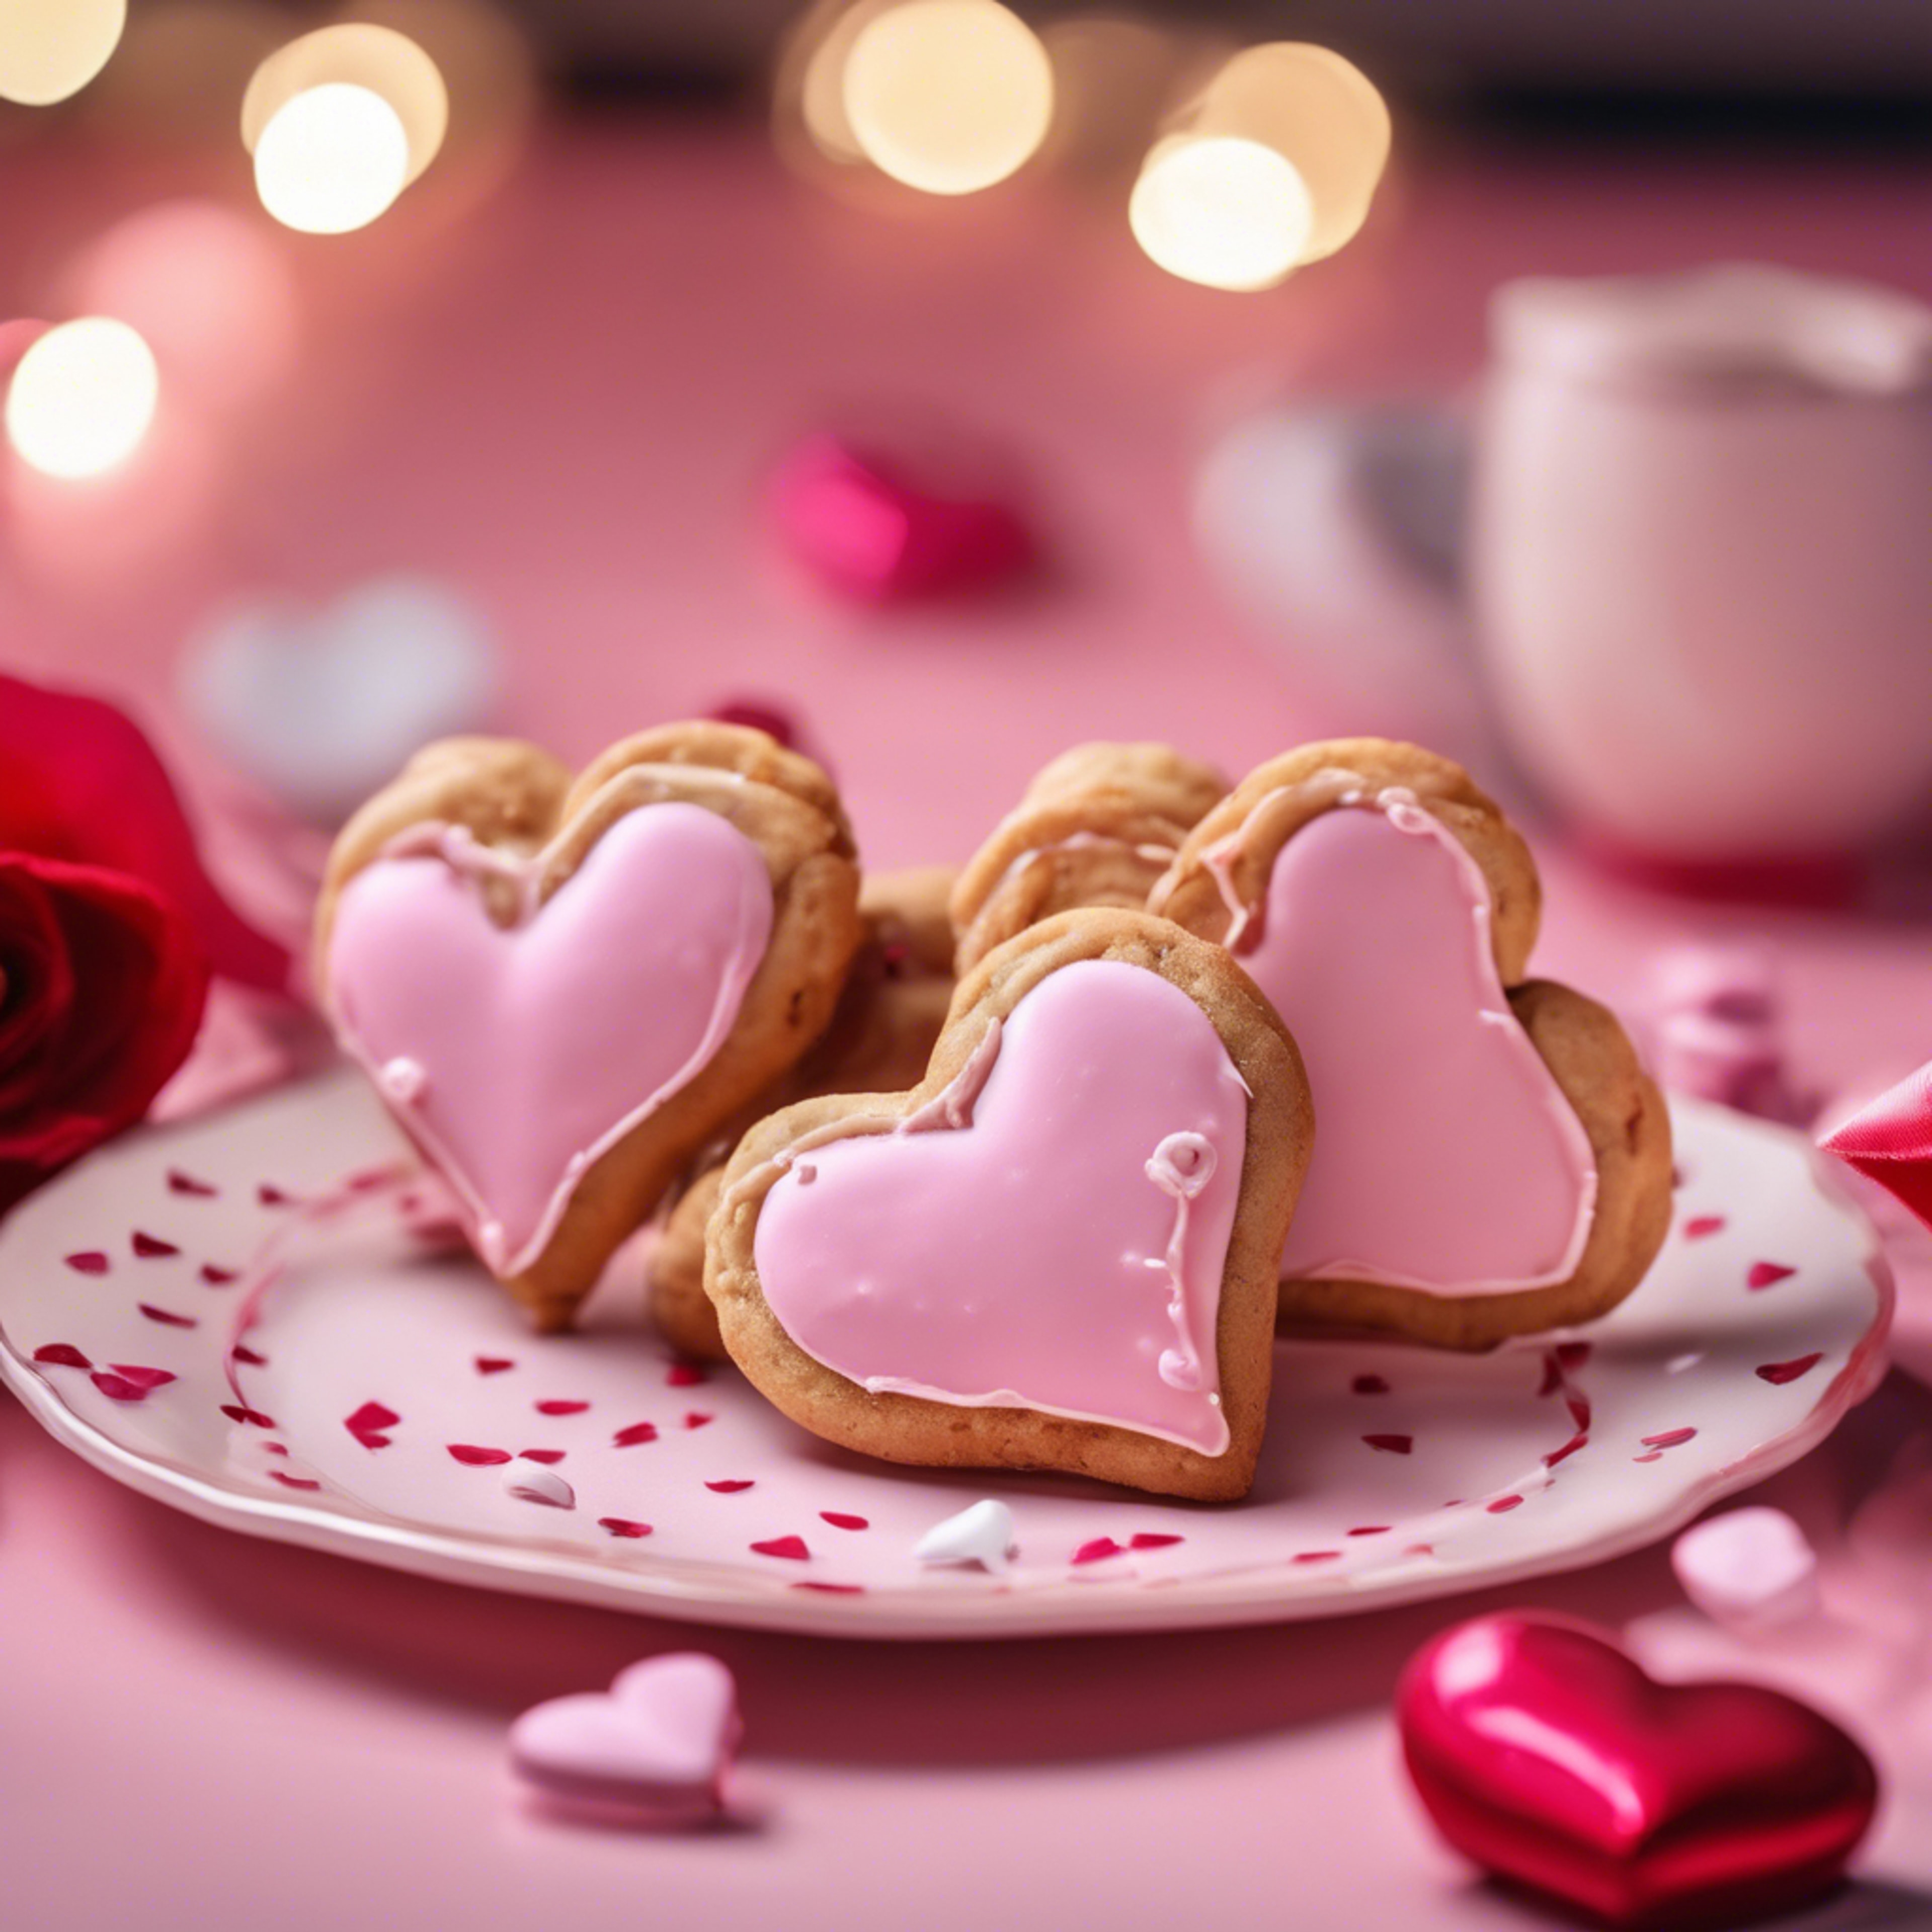 A pair of heart-shaped frosted cookies on a vibrant Valentine's day setting. Тапет[699c1bd667c44183af85]